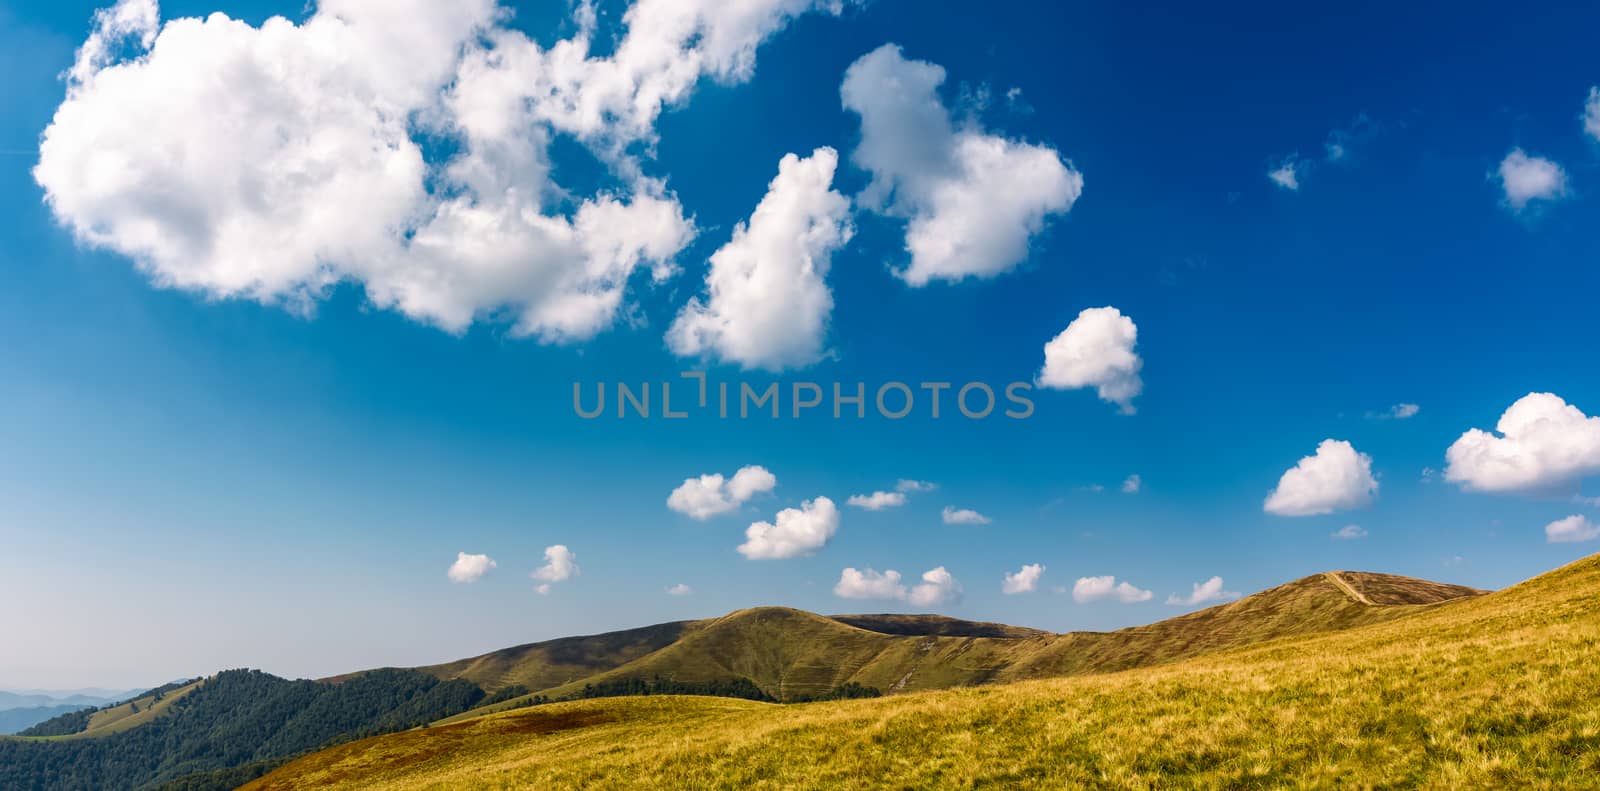 beautiful cloud formations on a deep blue sky. lovely panoramic landscape of mountain ridge